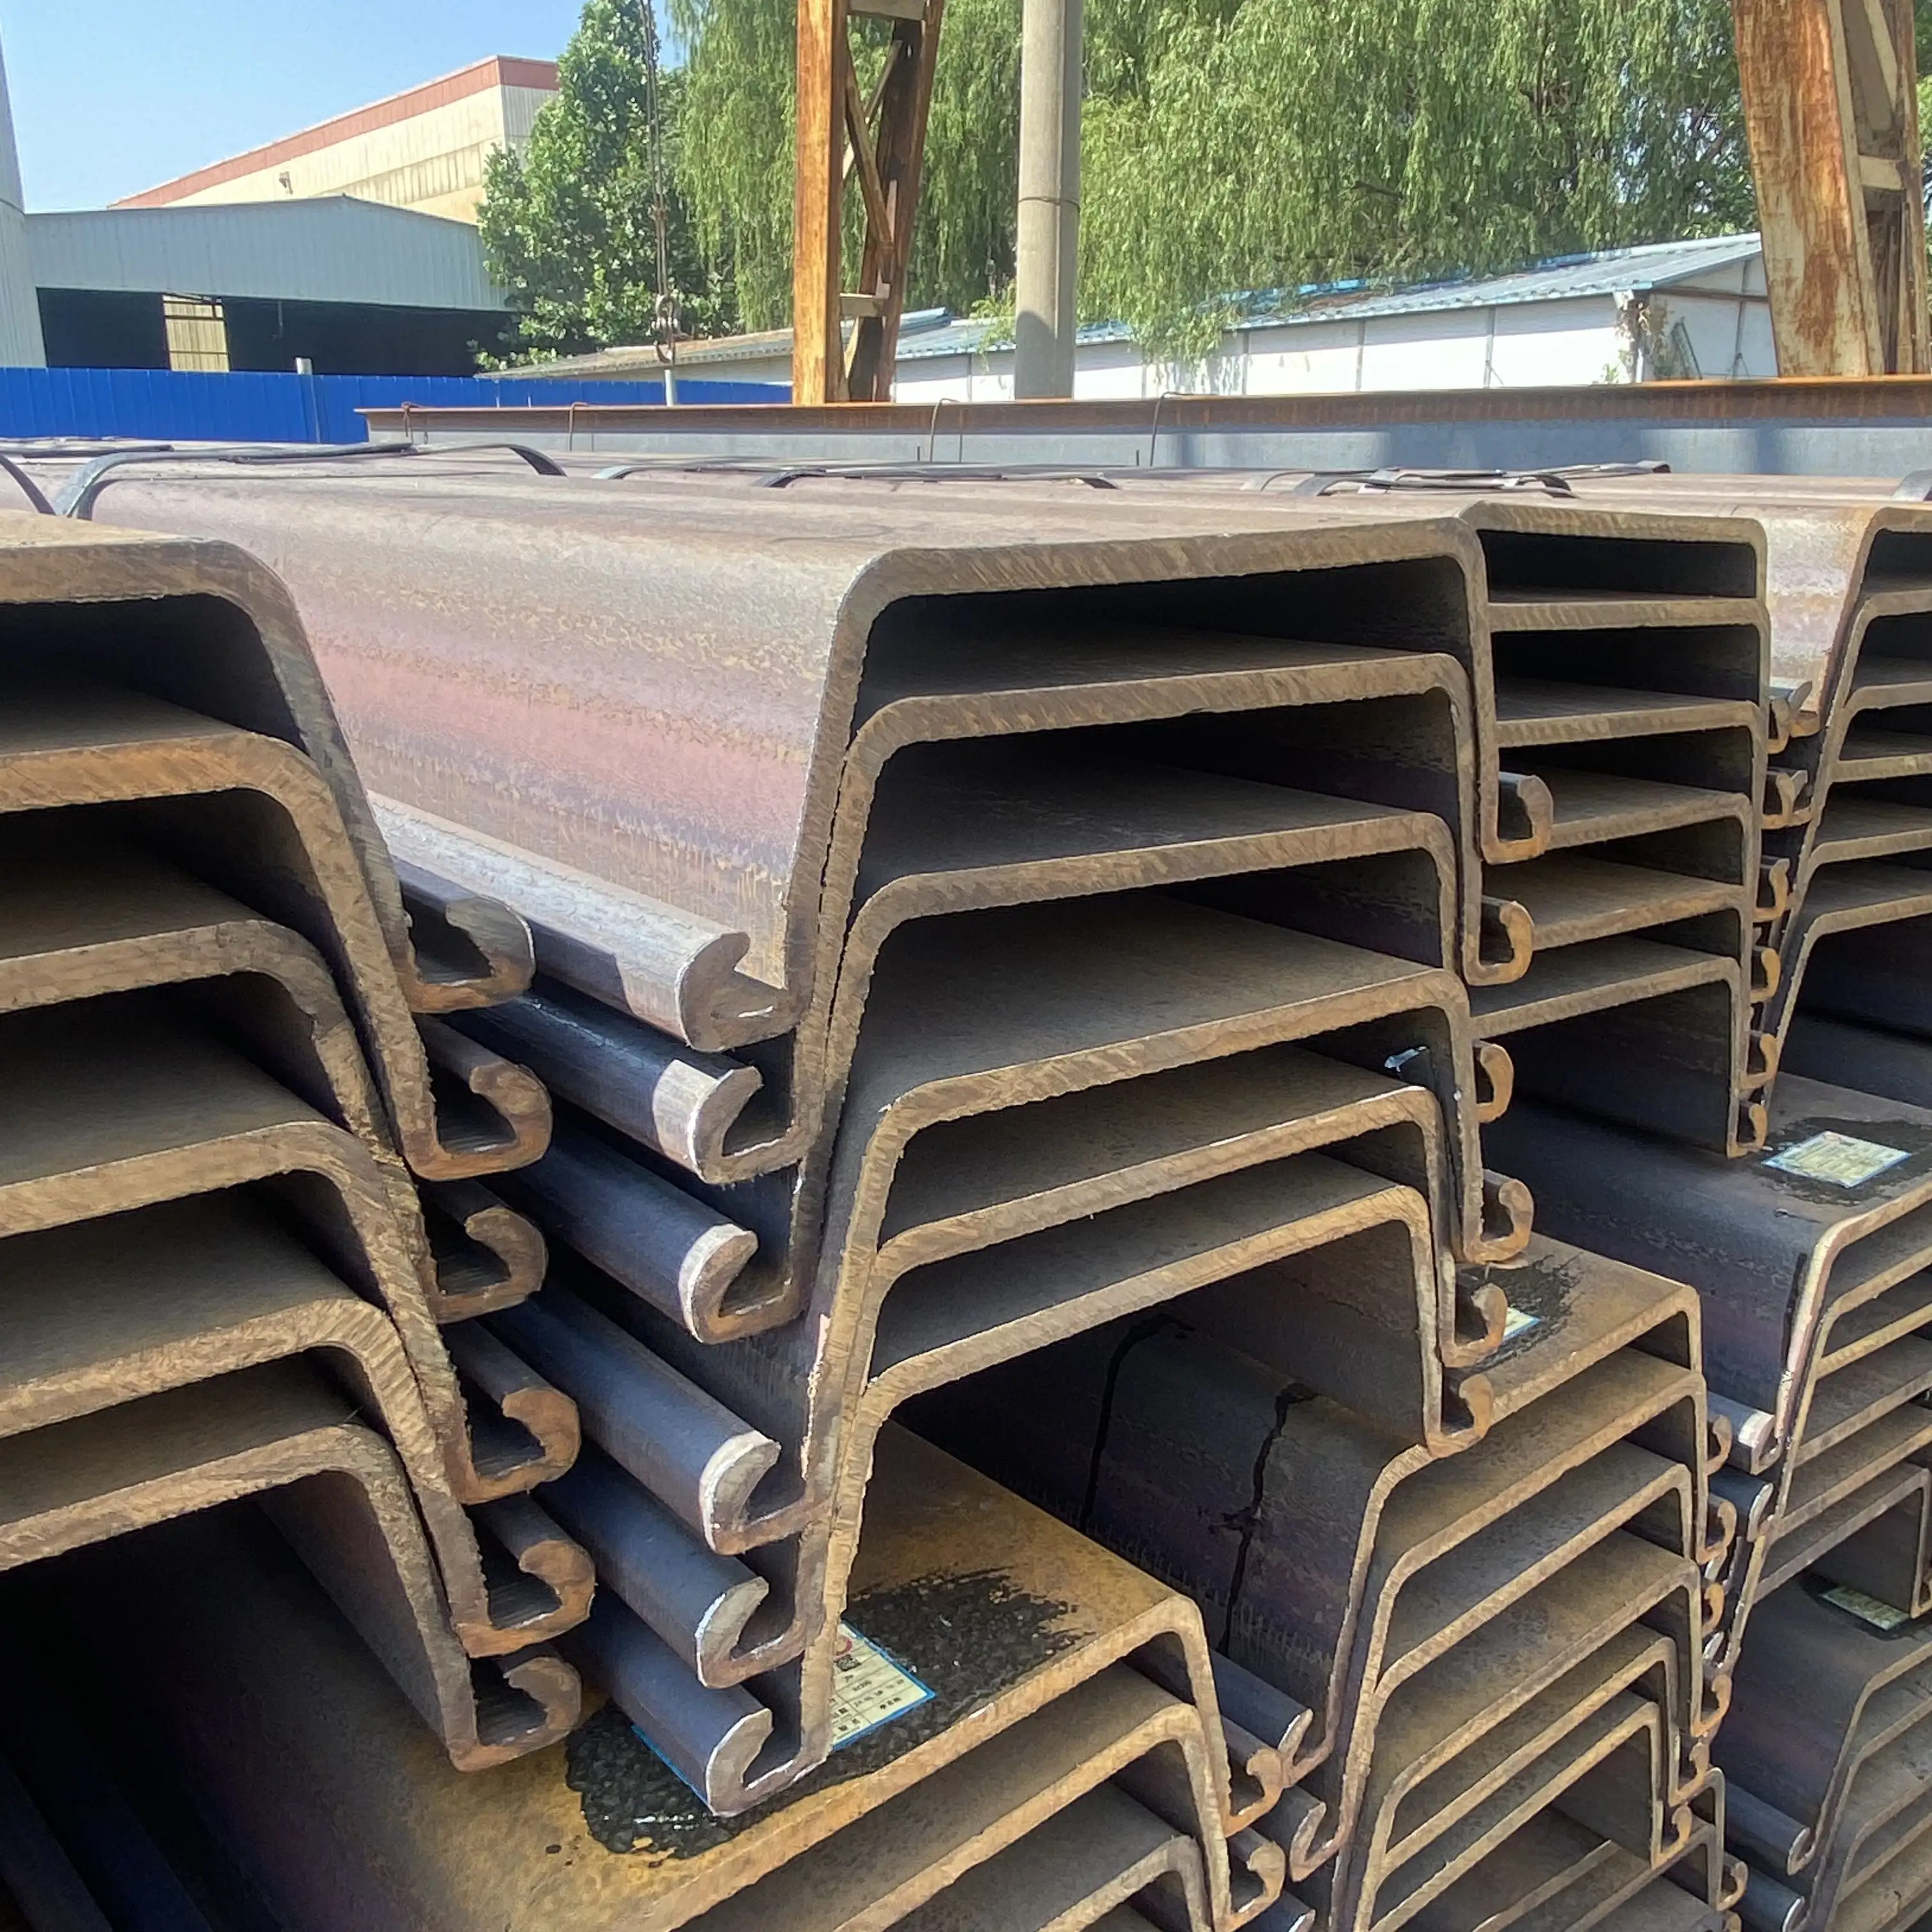 Sy290, Sy390 JIS A5528 400X100X10.5mm Type 2 Hot Rolled U Type Steel Sheet Pile for Construction